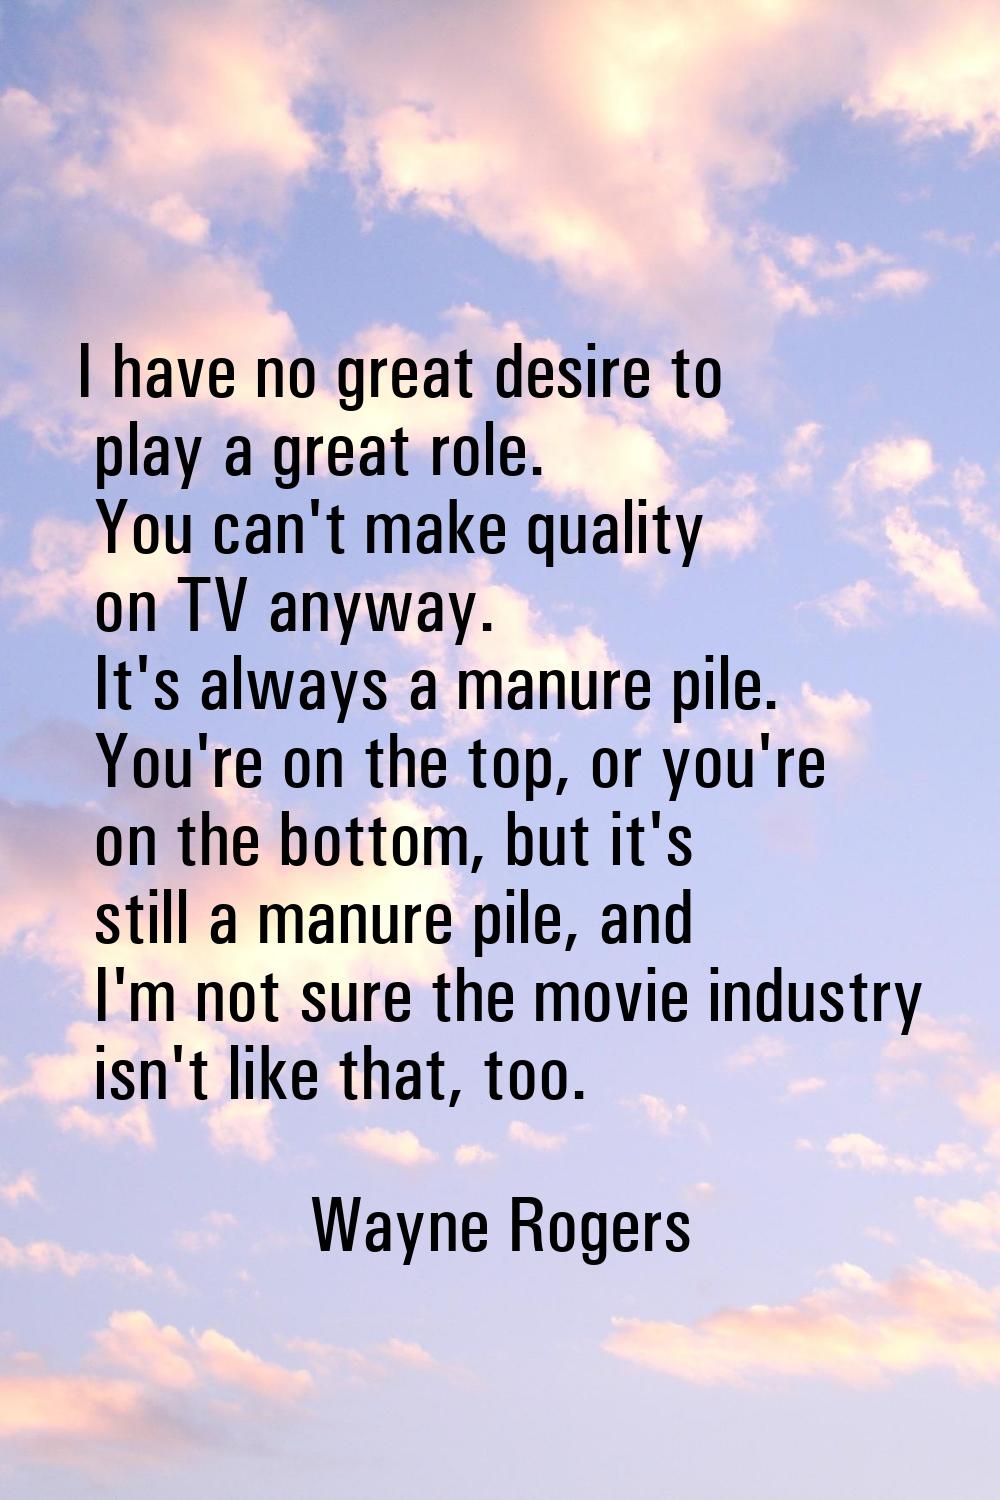 I have no great desire to play a great role. You can't make quality on TV anyway. It's always a man